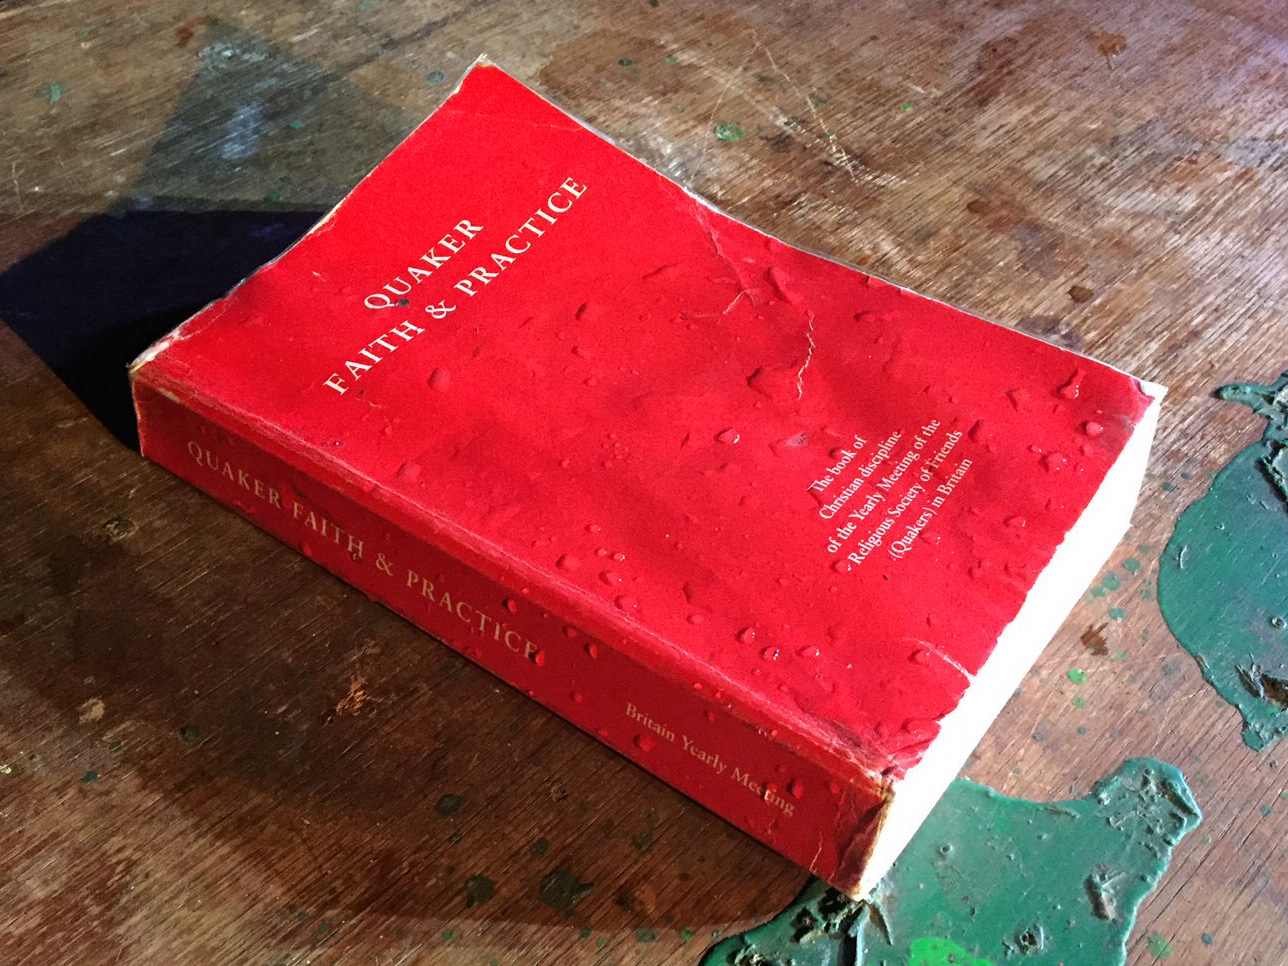 A water-soaked book, with a red cover, sits on a paint-splattered wooden surface.